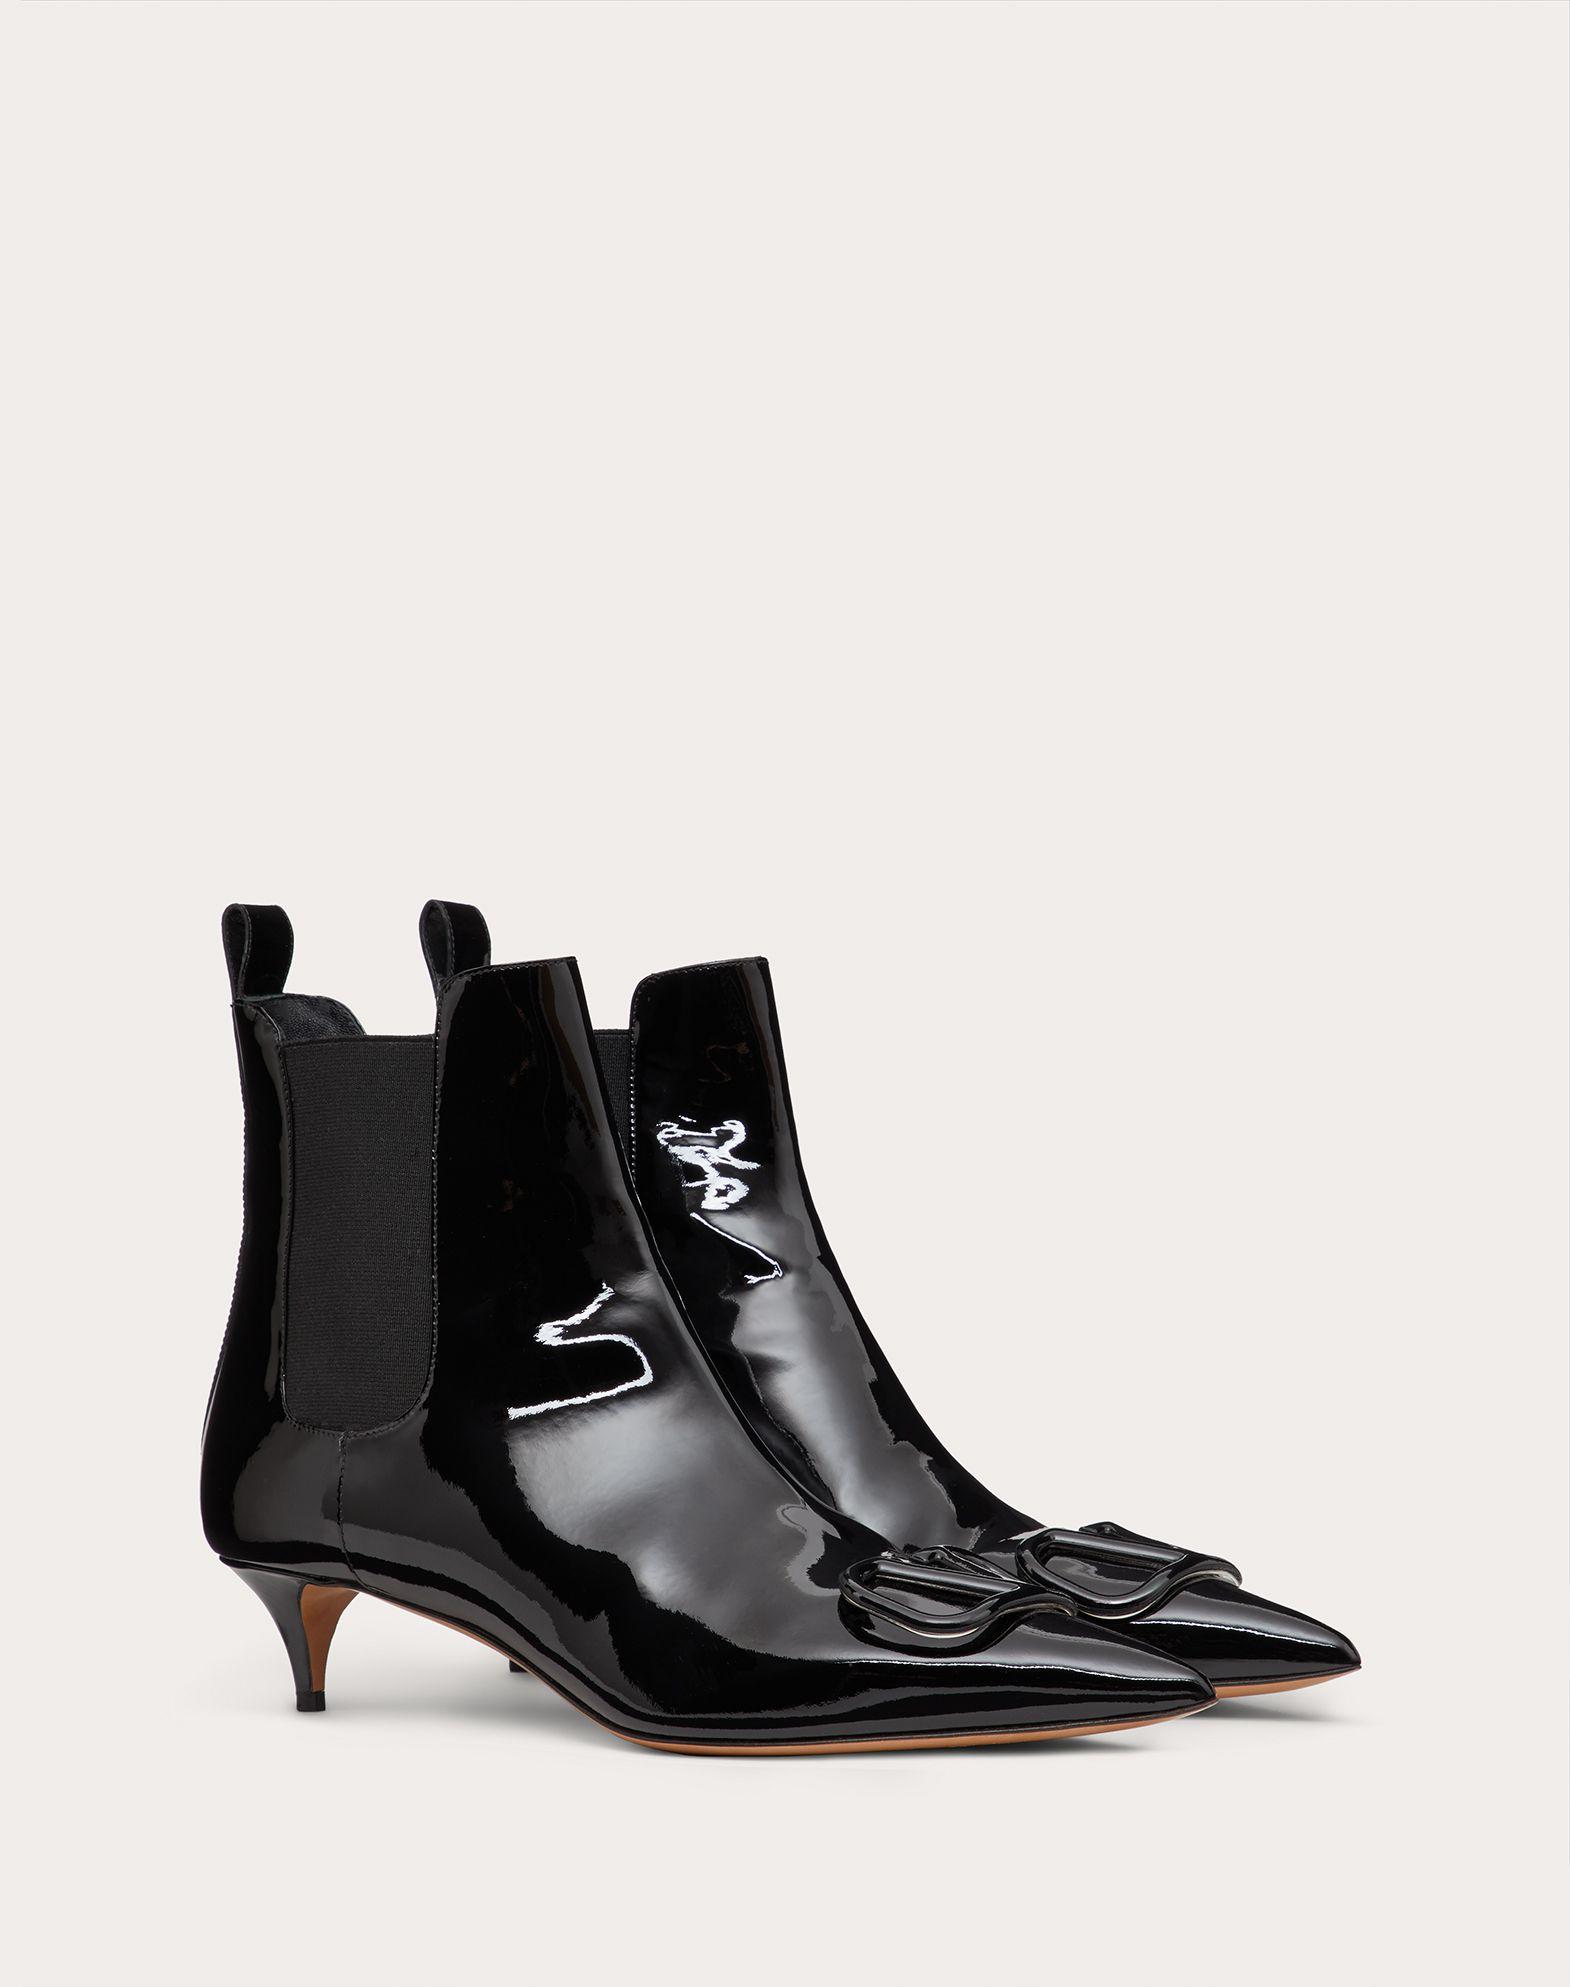 Synthetic Valentino Garavani Vlogo Signature Patent Leather Ankle Boot 40mm / 1.6 In. in Black - Lyst